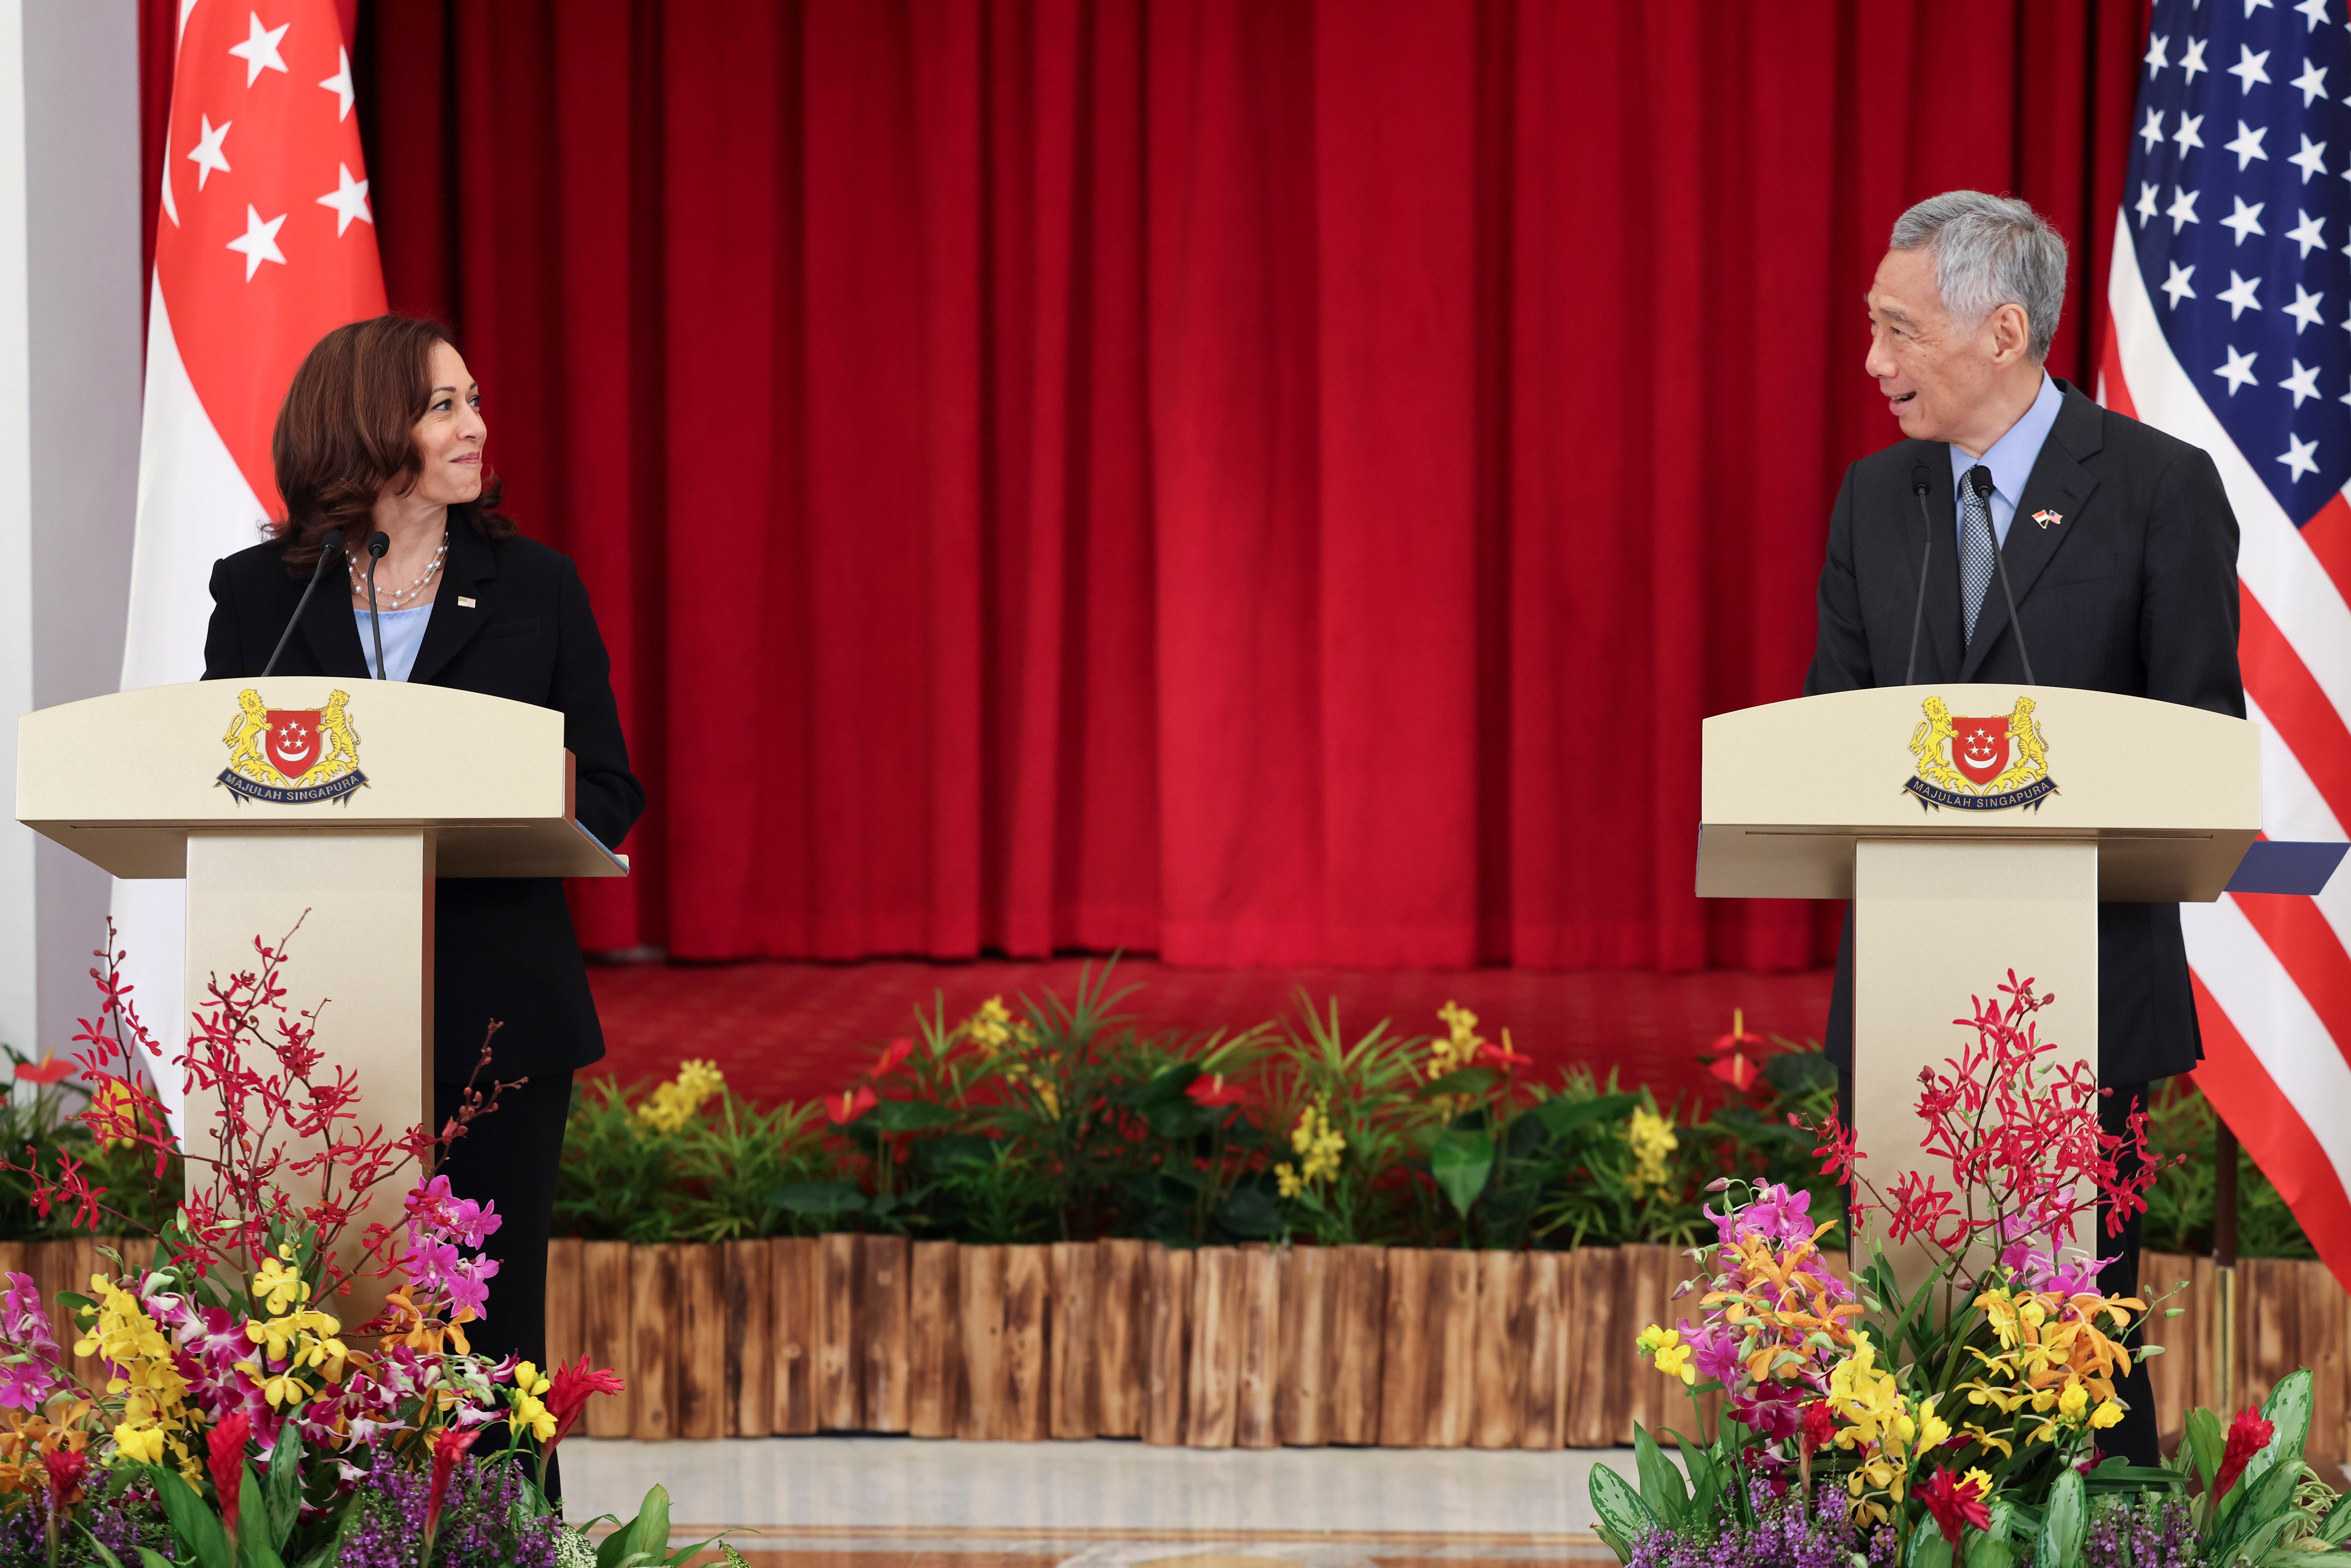 US vice president Kamala Harris, left, and Singapore's Prime Minister Lee Hsien Loong hold a joint news conference in Singapore Monday, 23 August 2021